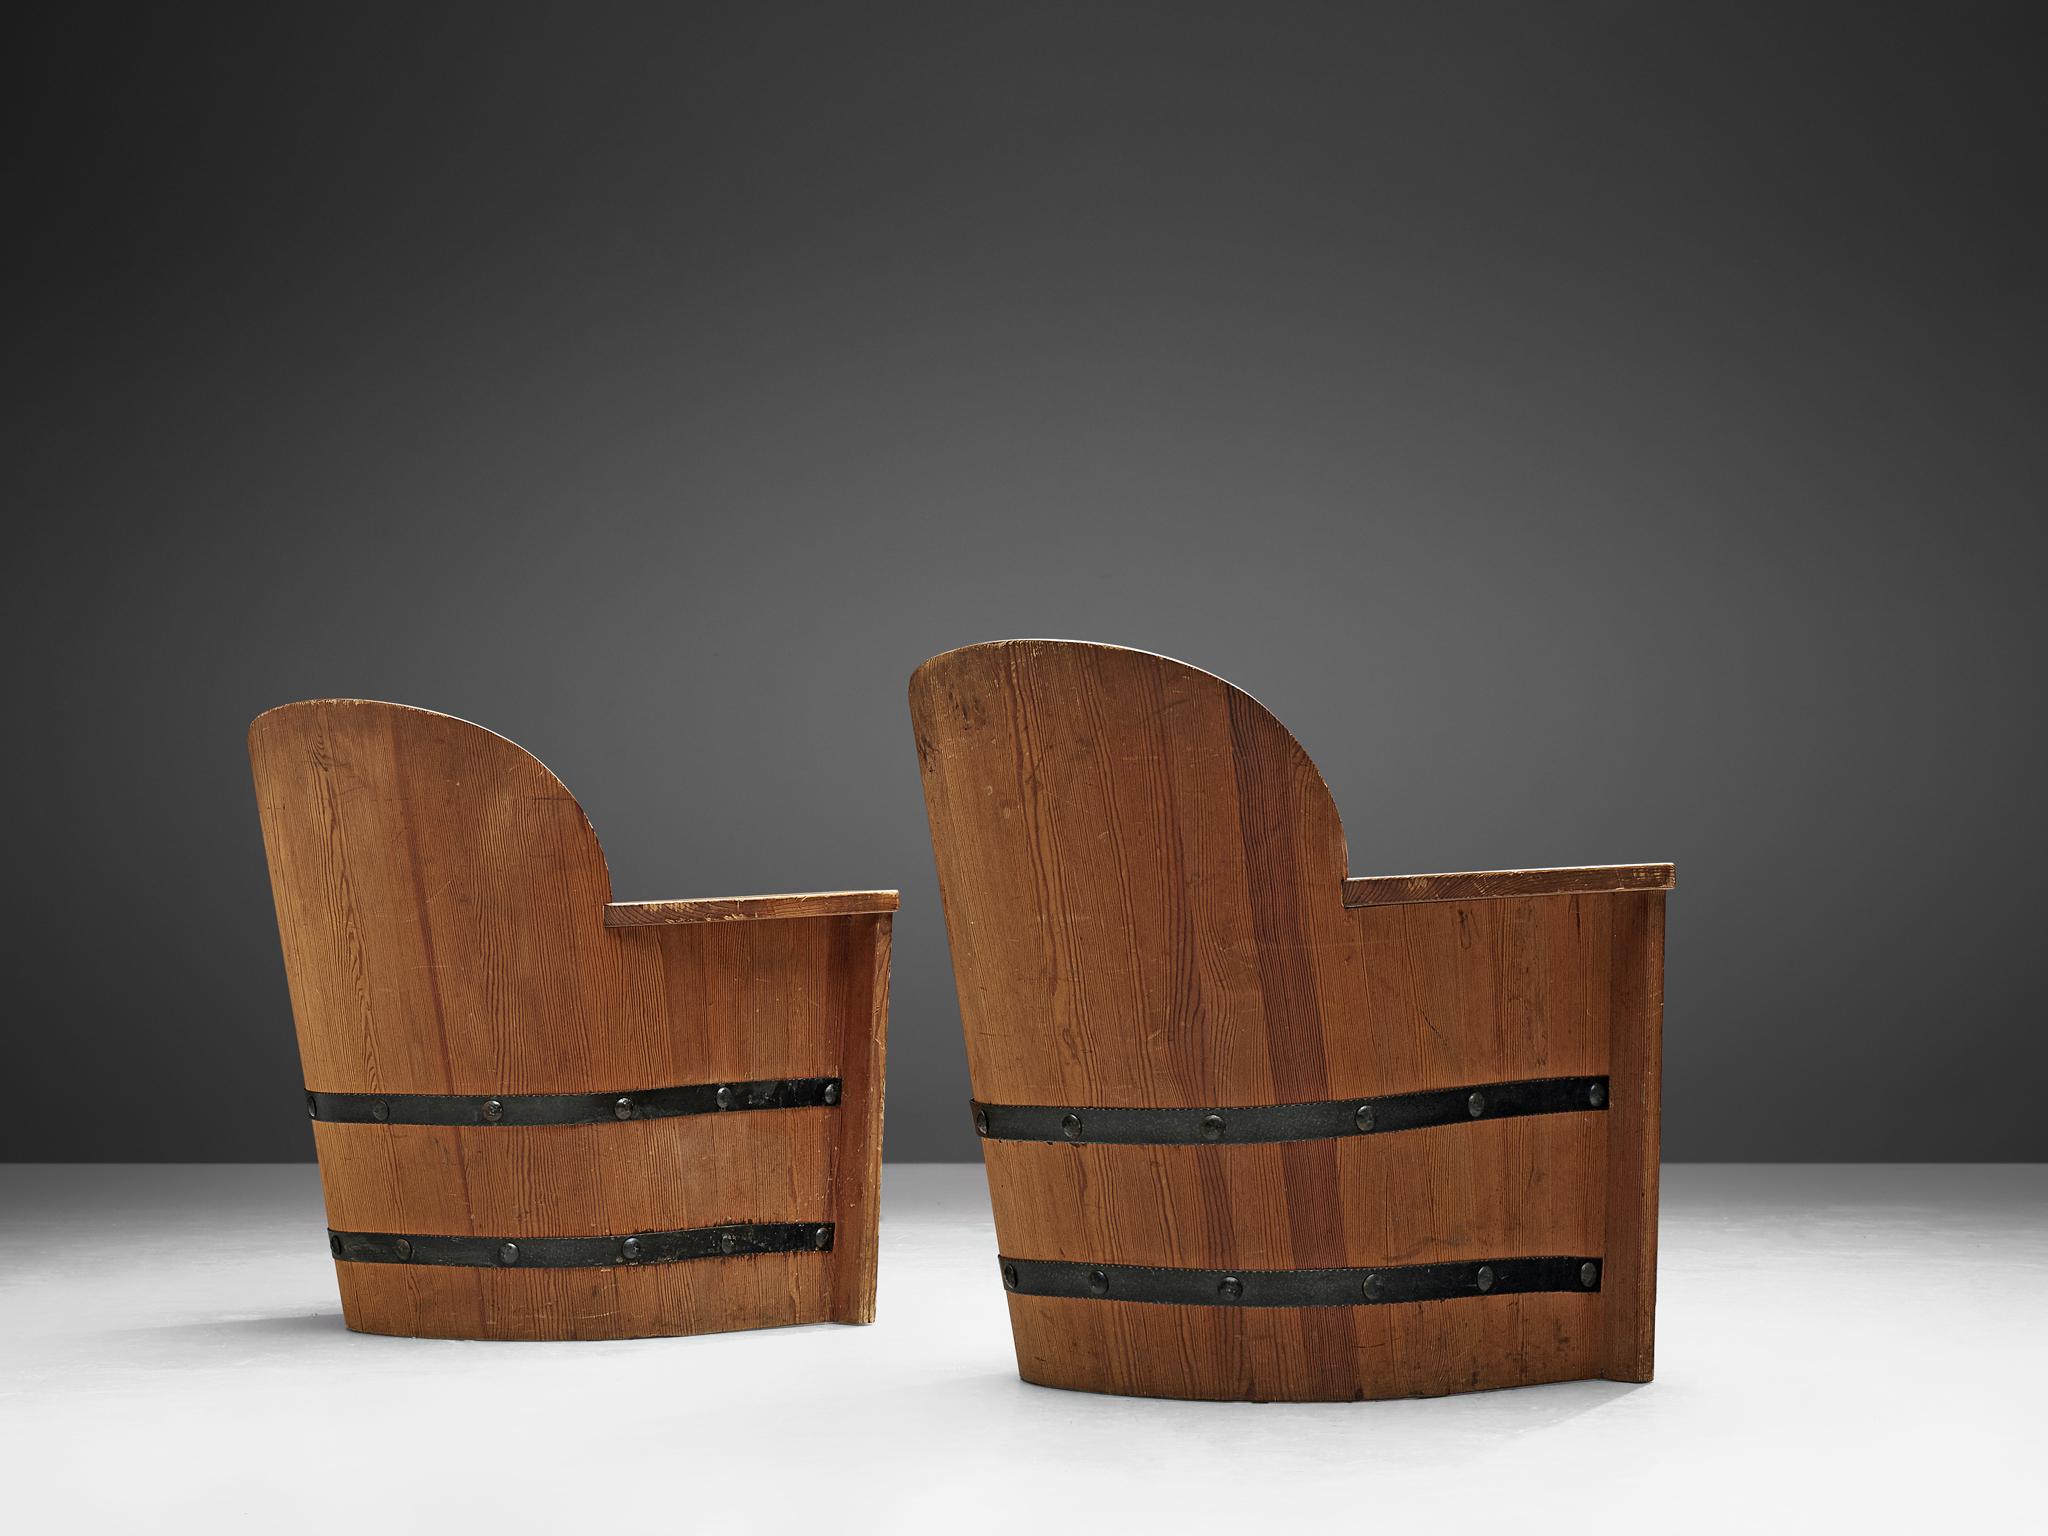 Pair of lounge chairs, pine, iron, Sweden, 1930s-1940s

Pair of armchairs made of stained pine with forged iron fittings. The chairs resemble the look of wooden barrels, giving it an artisan look. This is mainly achieved by the forged iron fitting